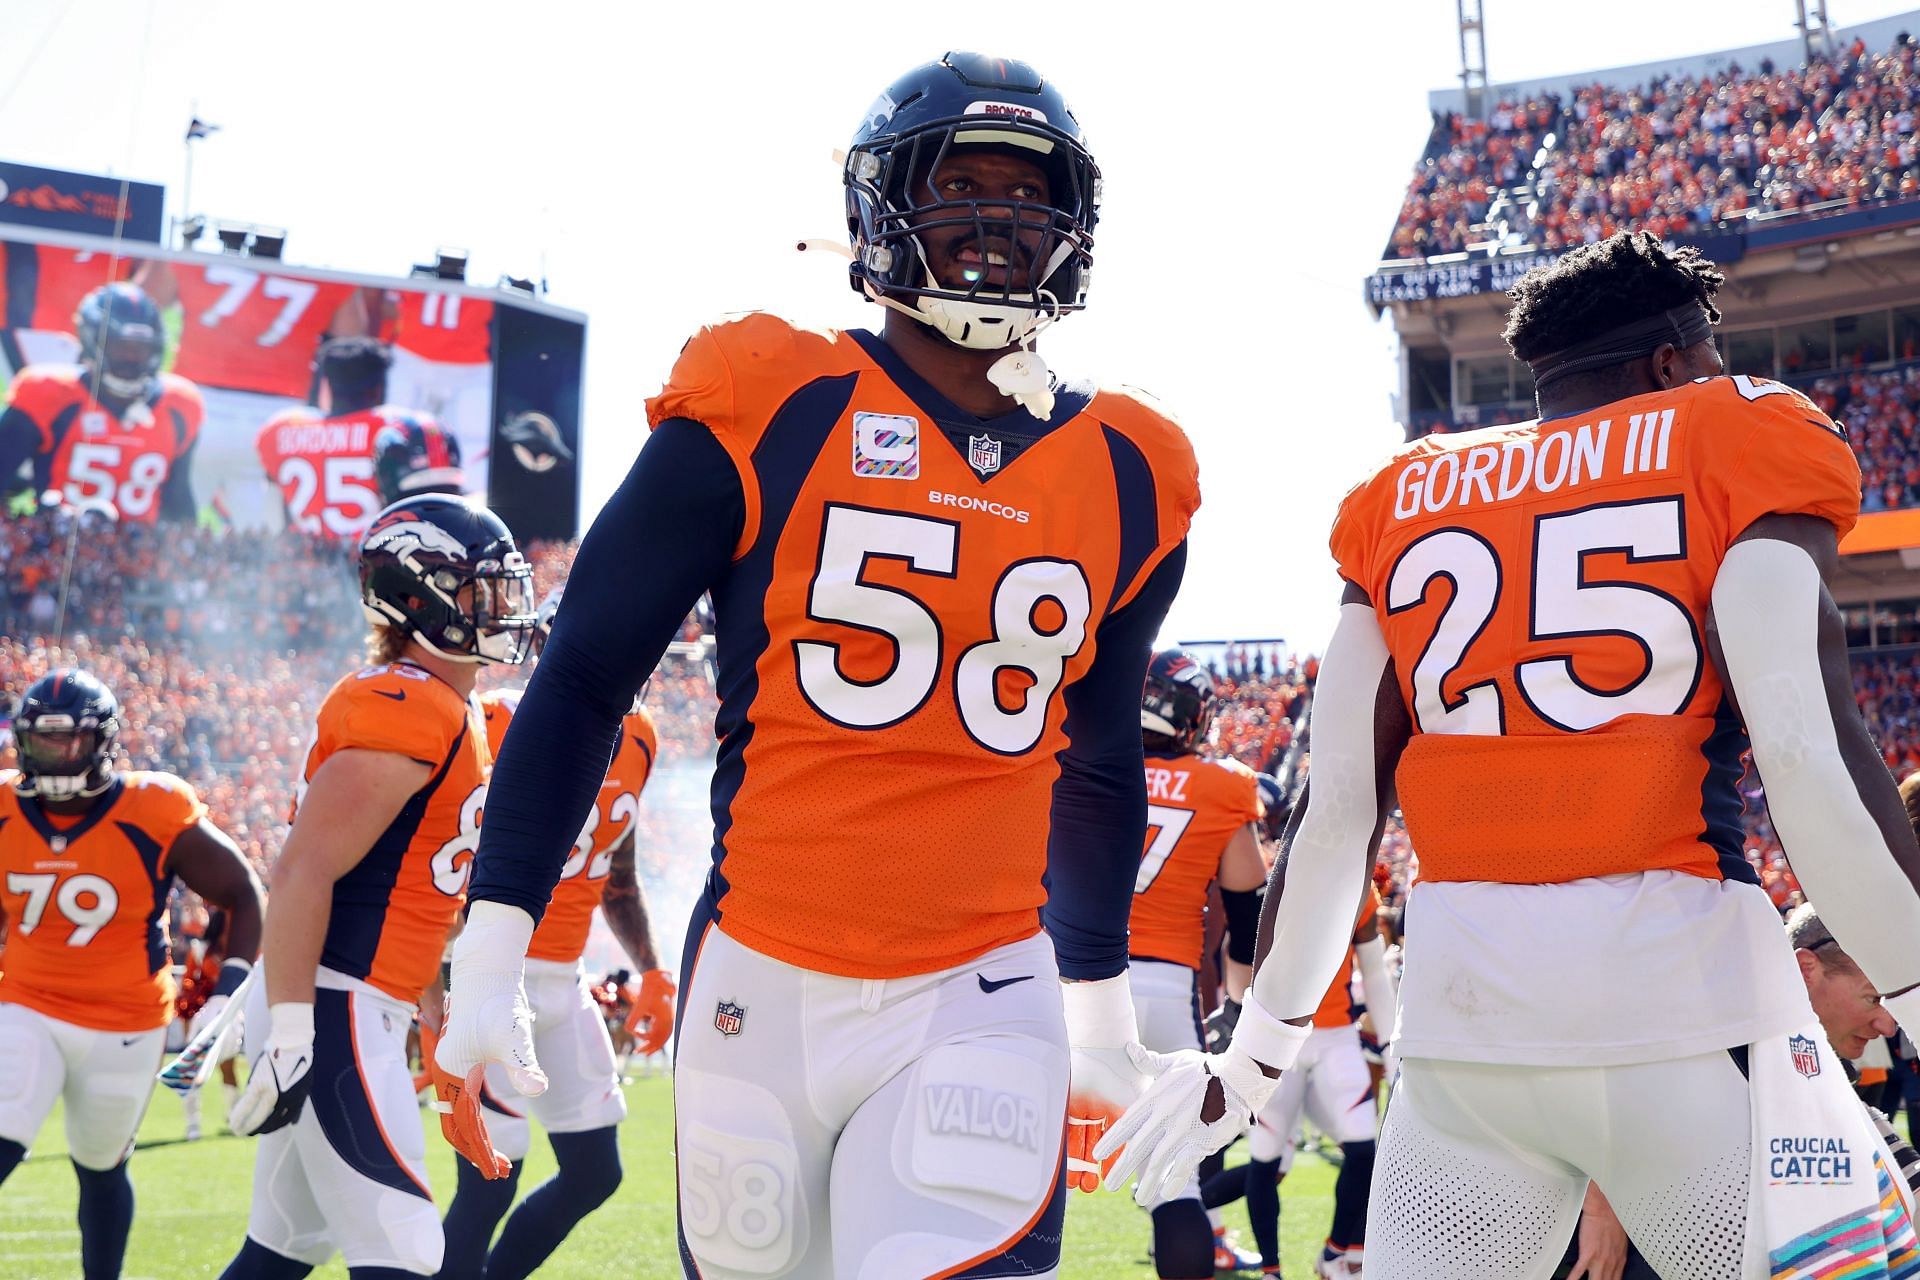 Von Miller wants to play well against the Browns